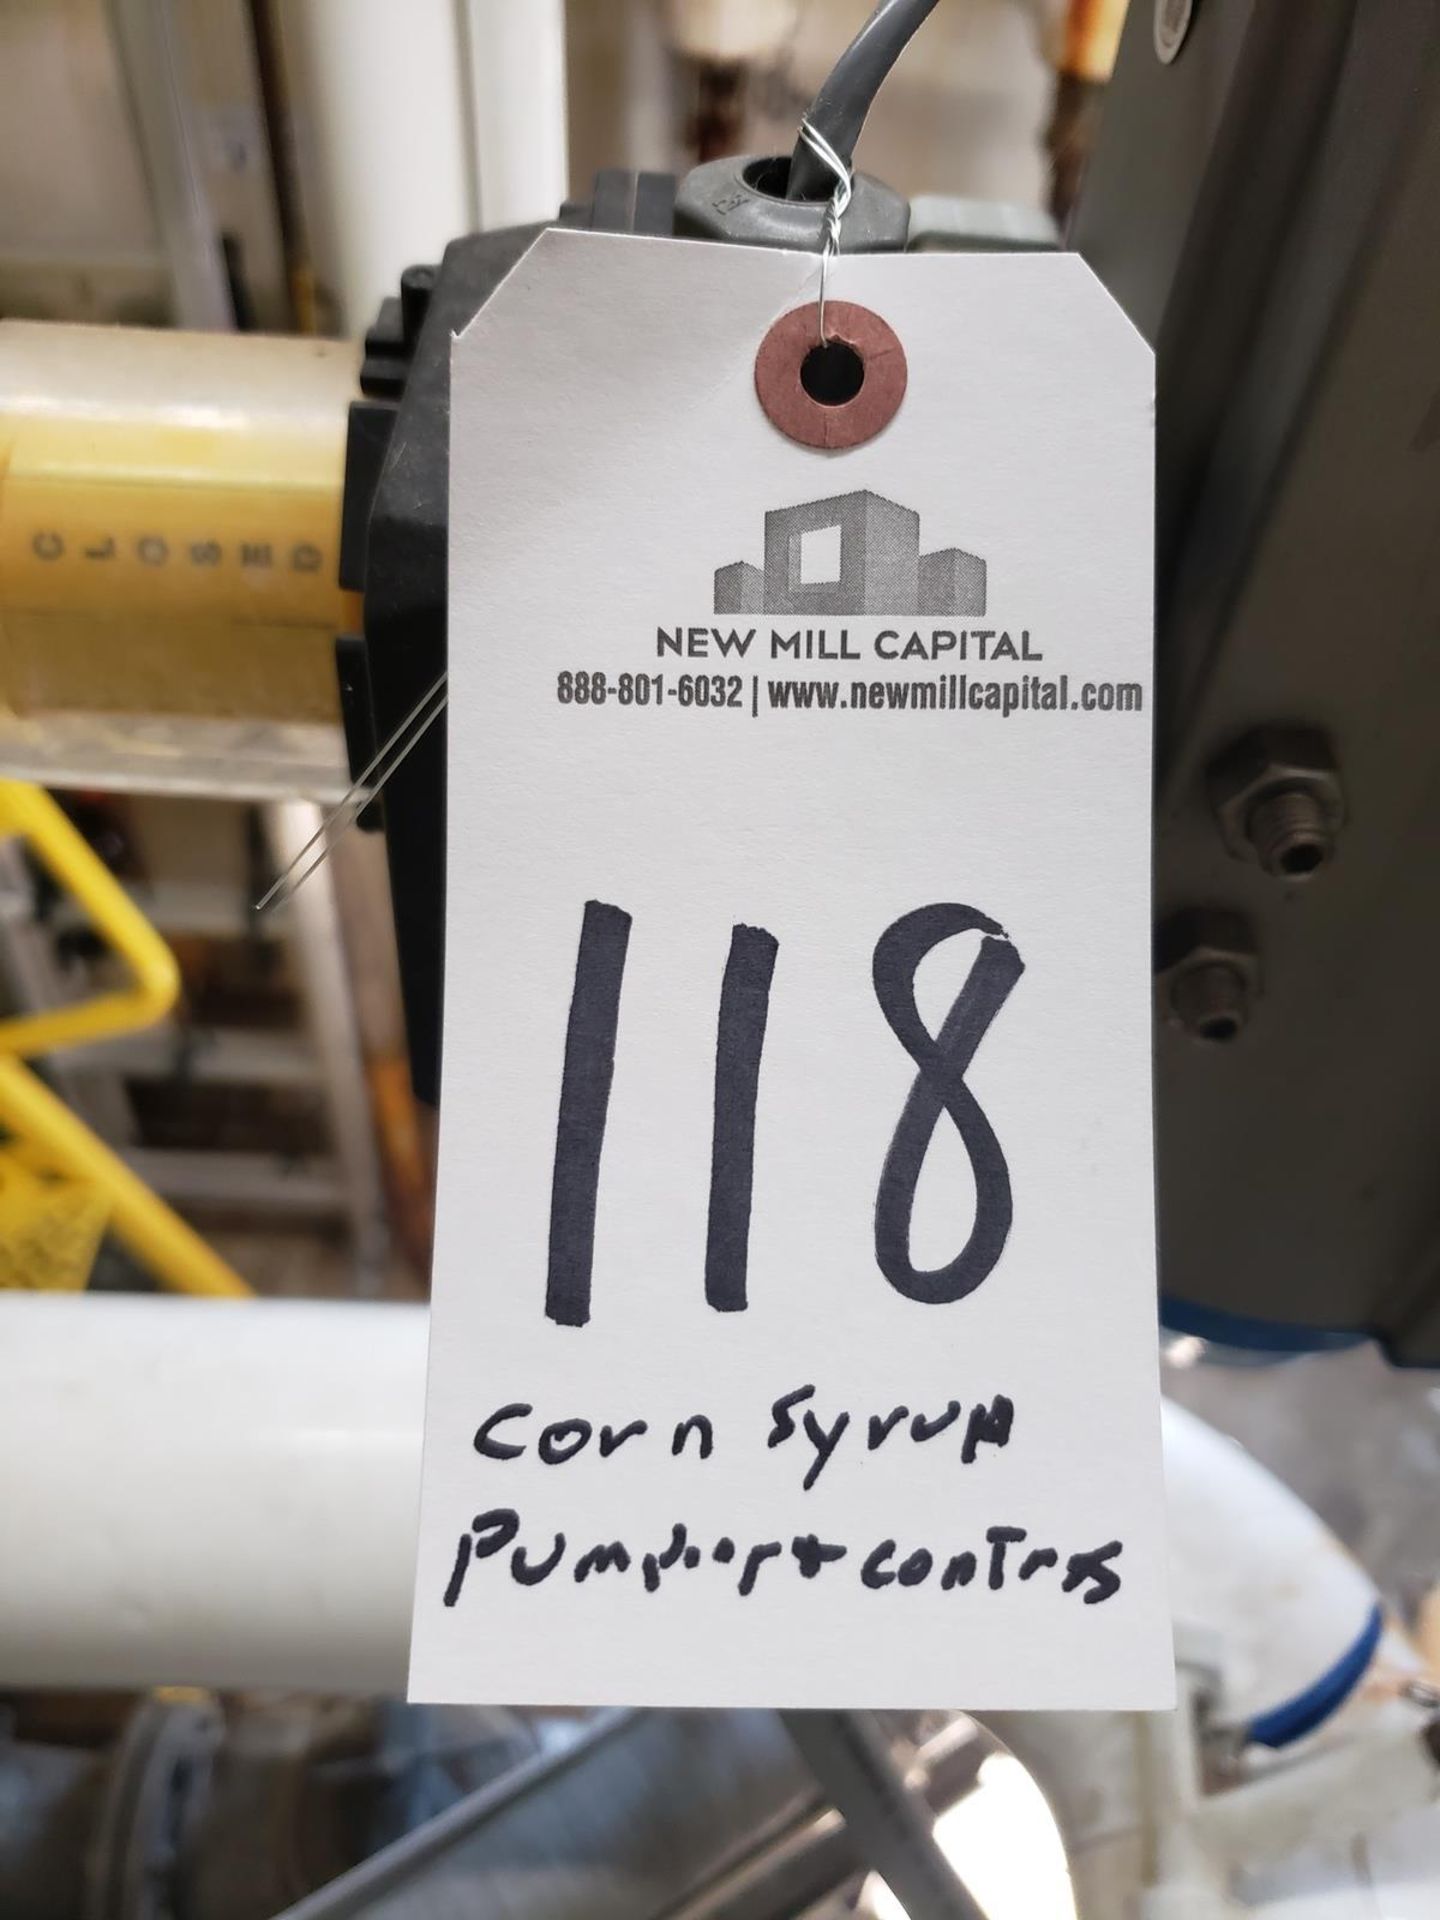 Contents of Corn Syrup Pumping/Control Room | Rig Fee $3500